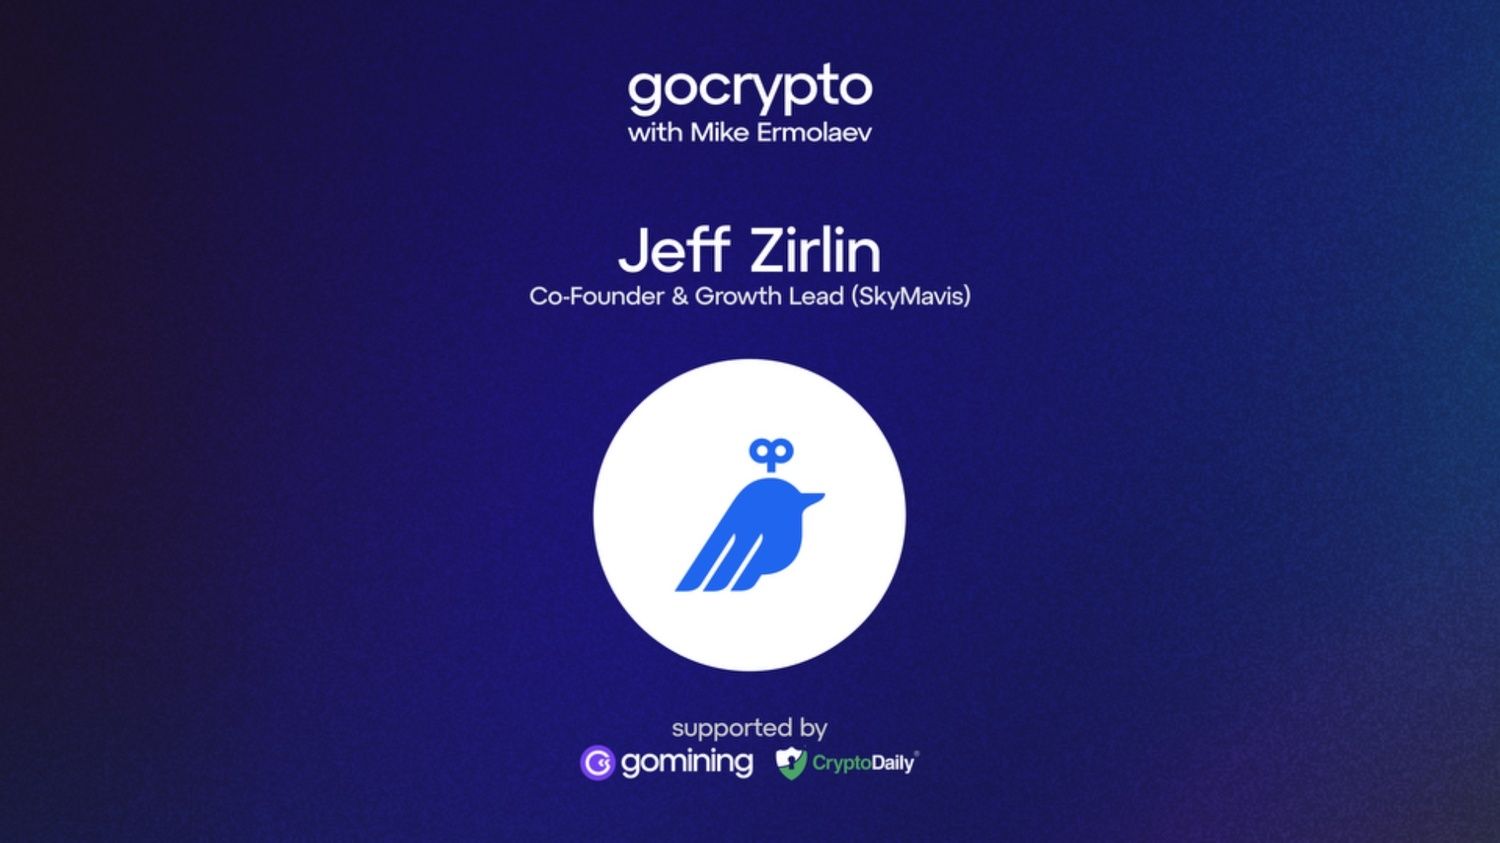 How Blockchain Is Transforming the Gaming Industry: A Conversation with Sky Mavis Co-Founder and Growth Lead Jeff Zirlin